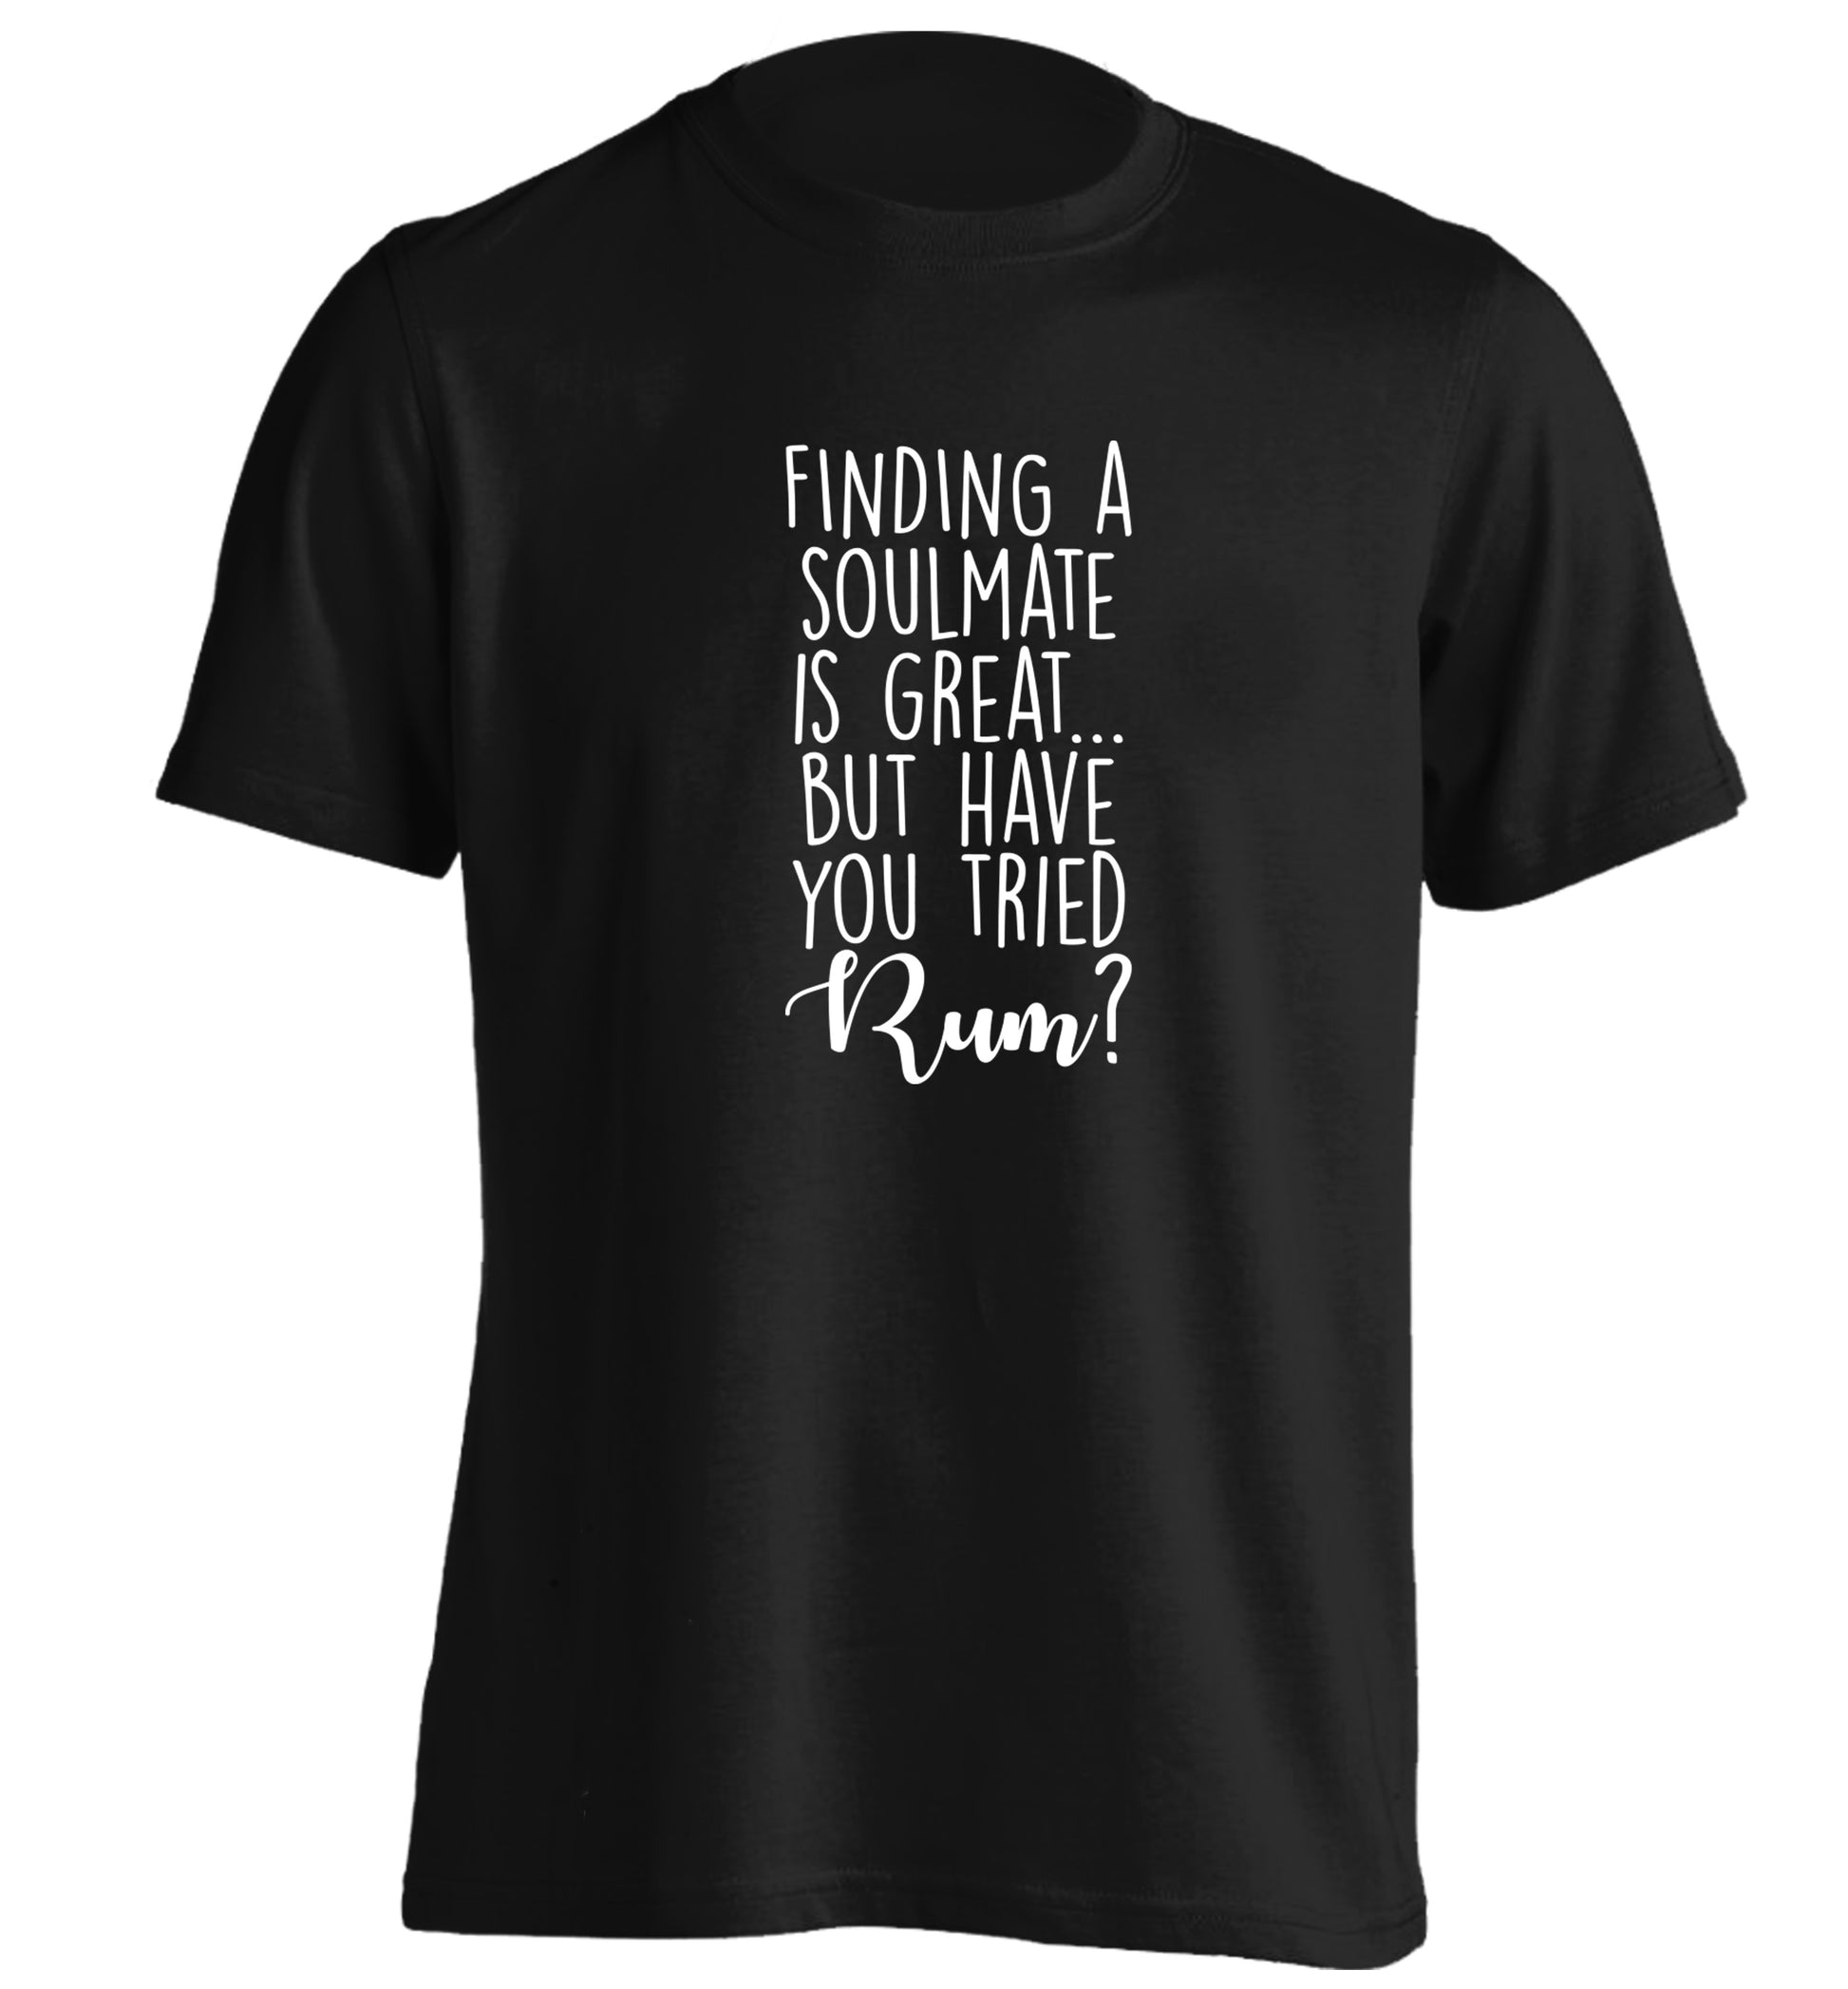 Finding a soulmate is great but have you tried rum? adults unisex black Tshirt 2XL